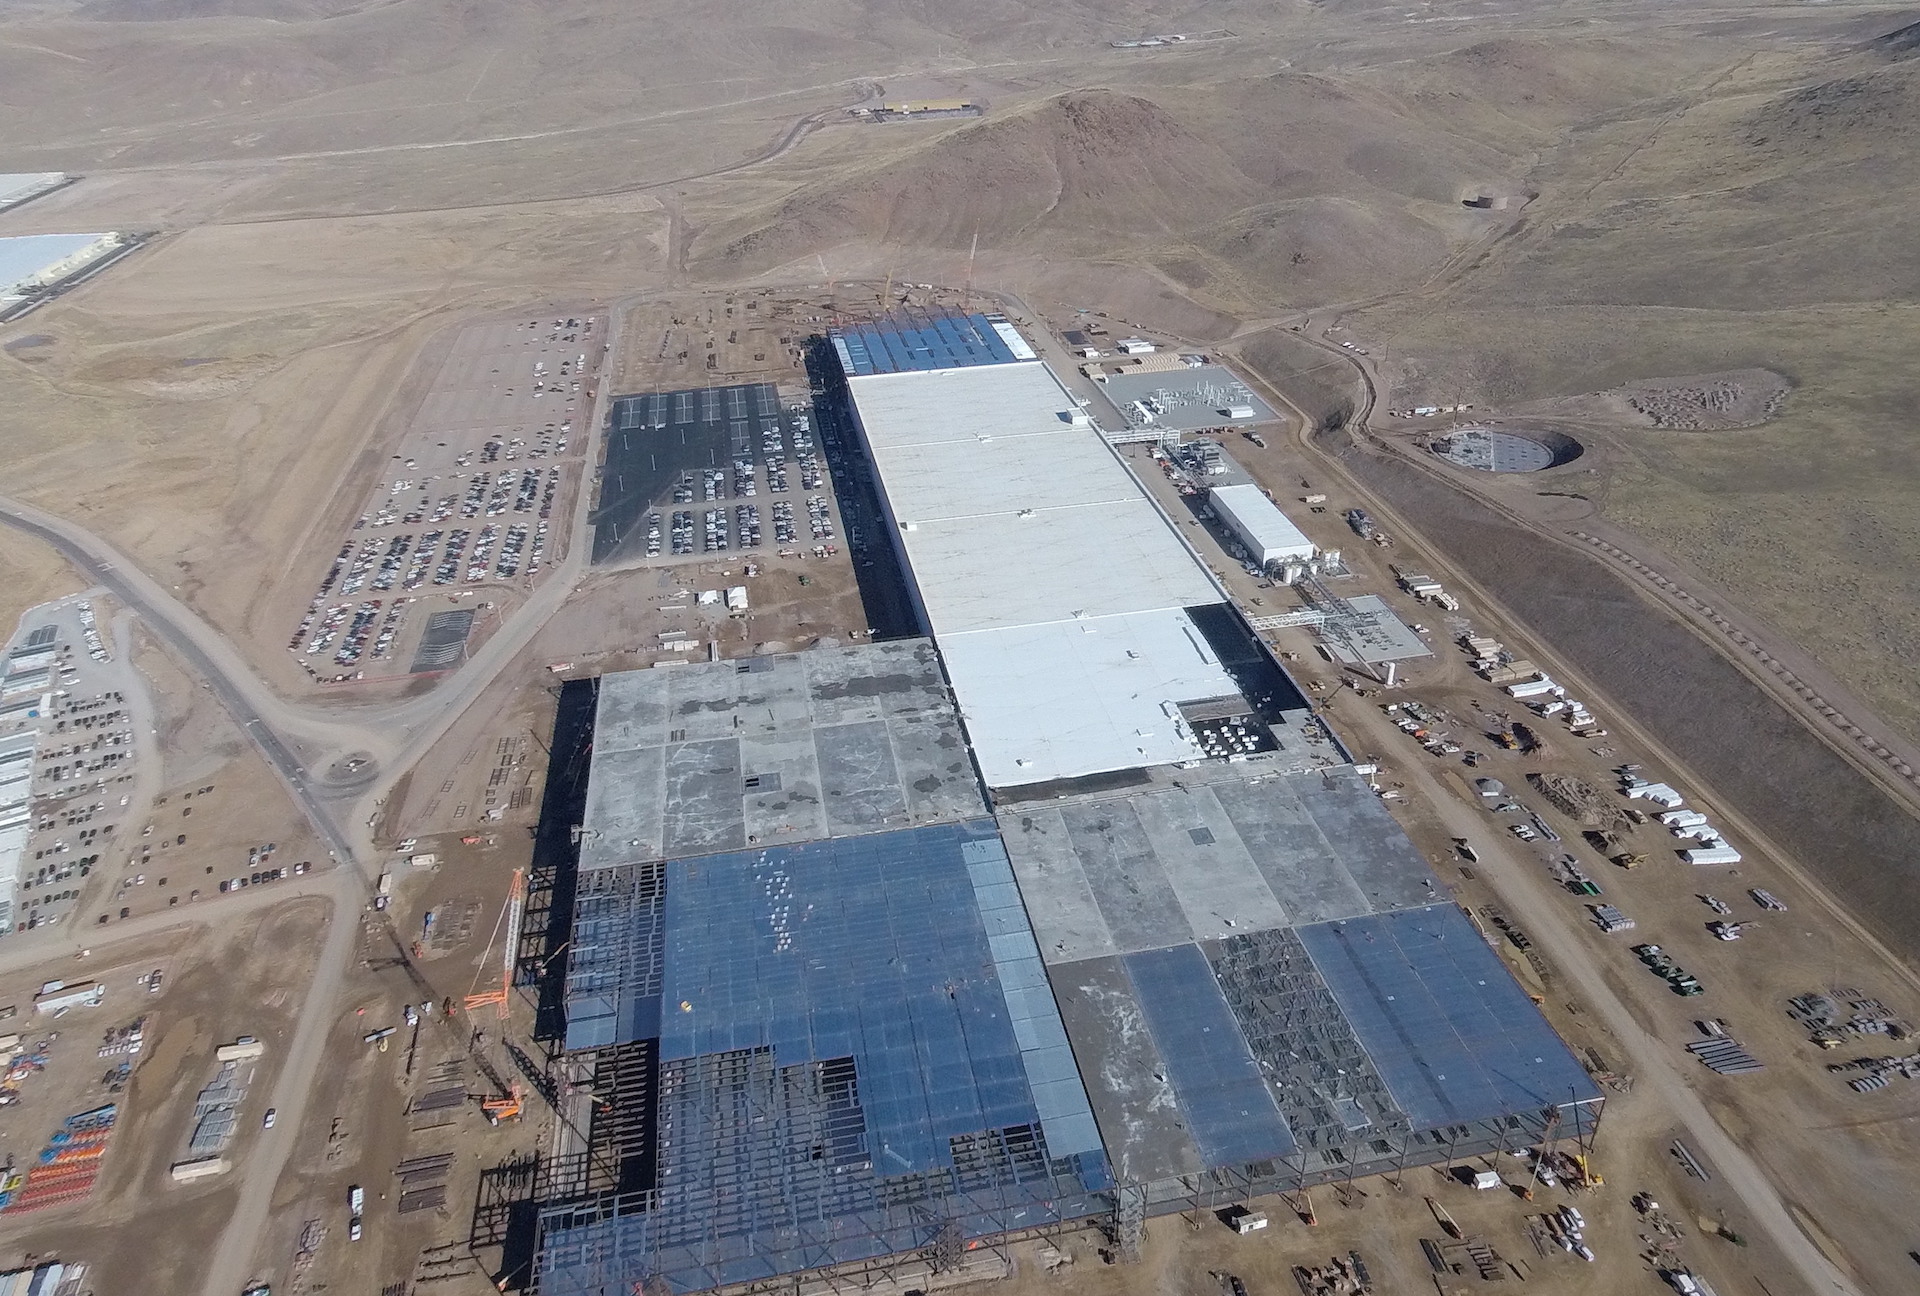 Panasonic would consider extra investment in Tesla's Gigafactory if requested - executive